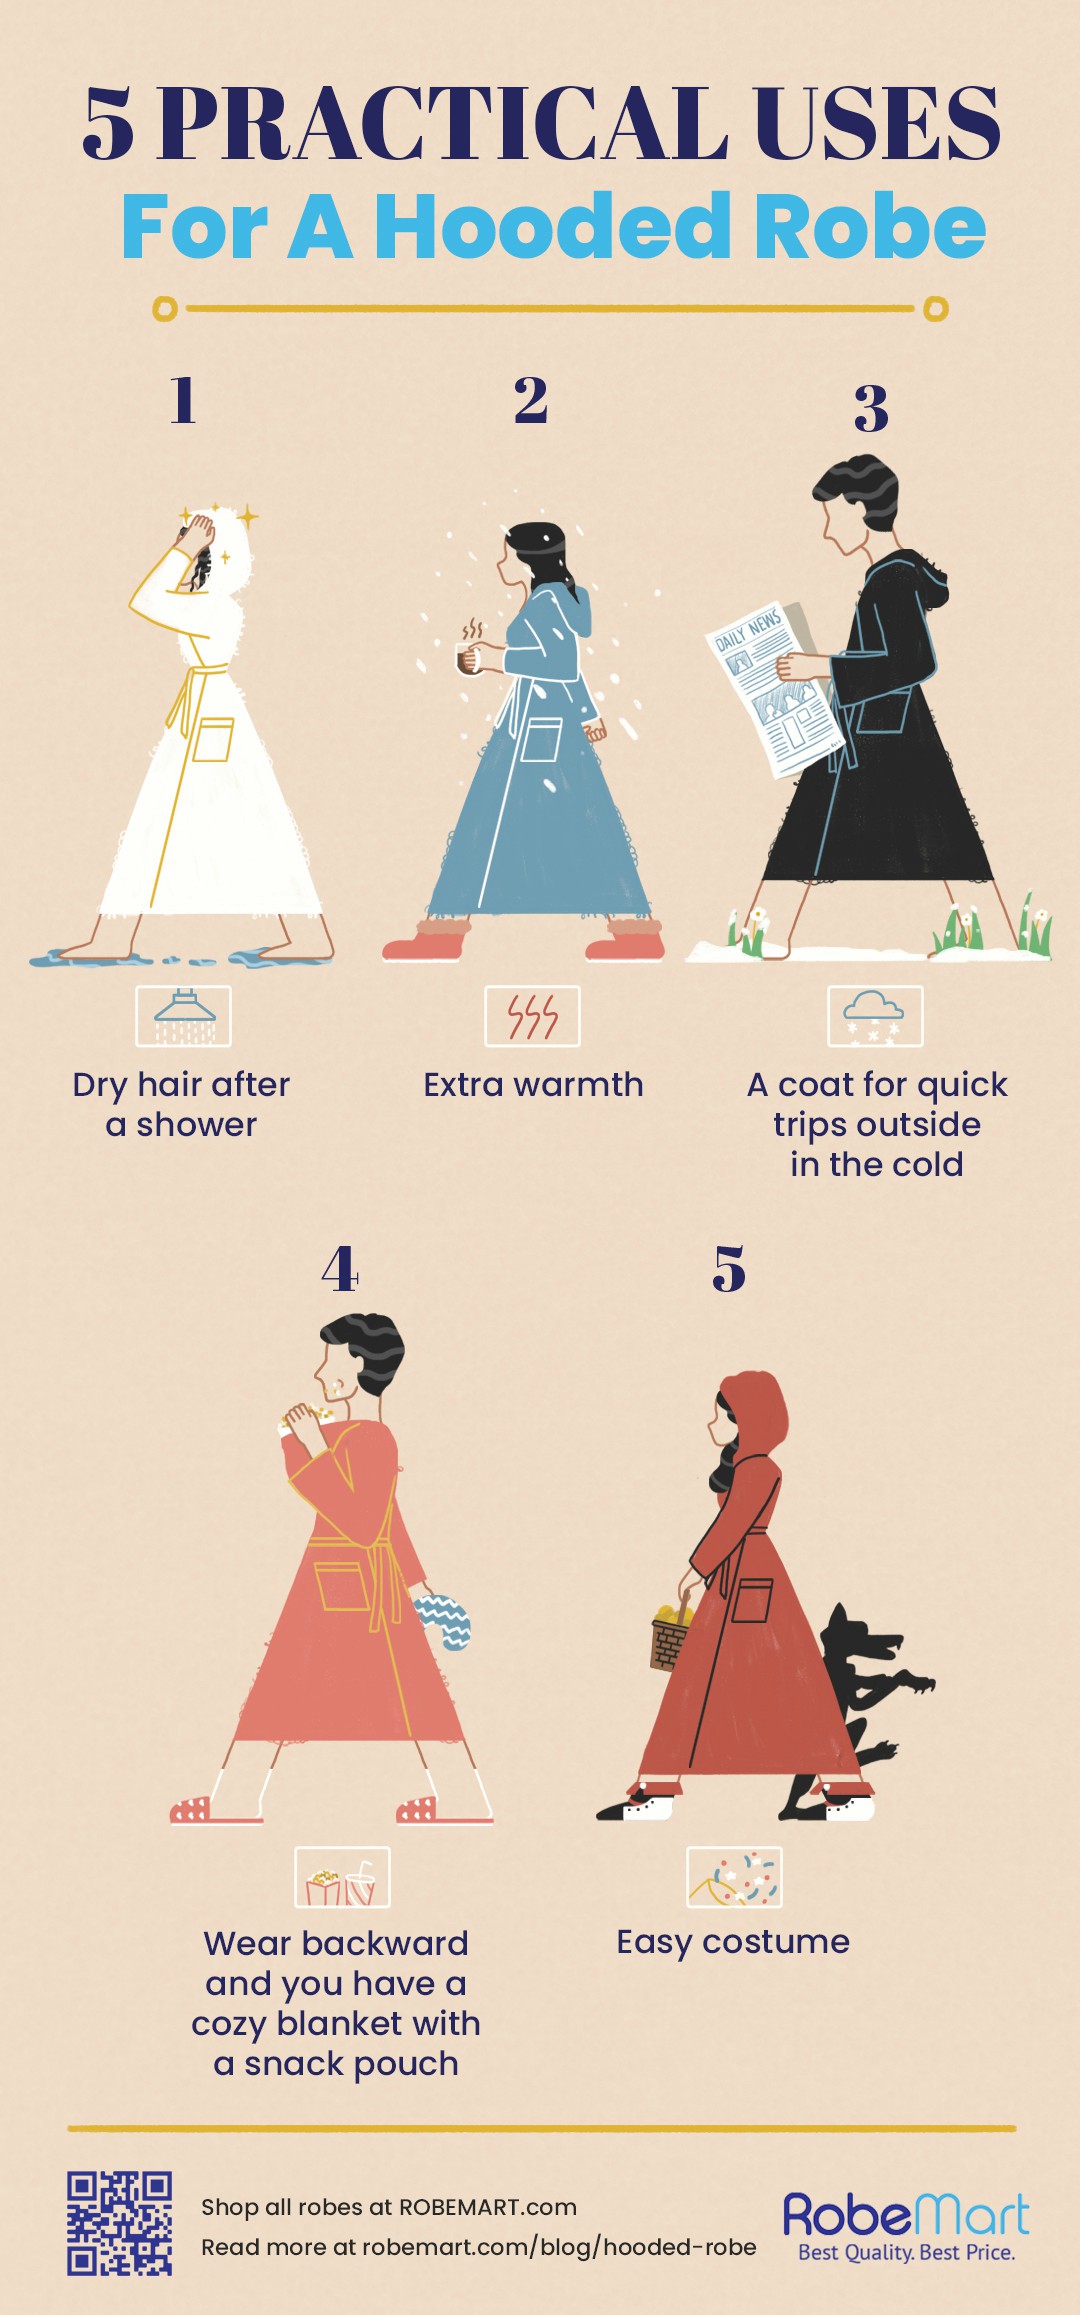 7 Reasons Why A Hooded Robe Is Underrated [INFOGRAPHIC]